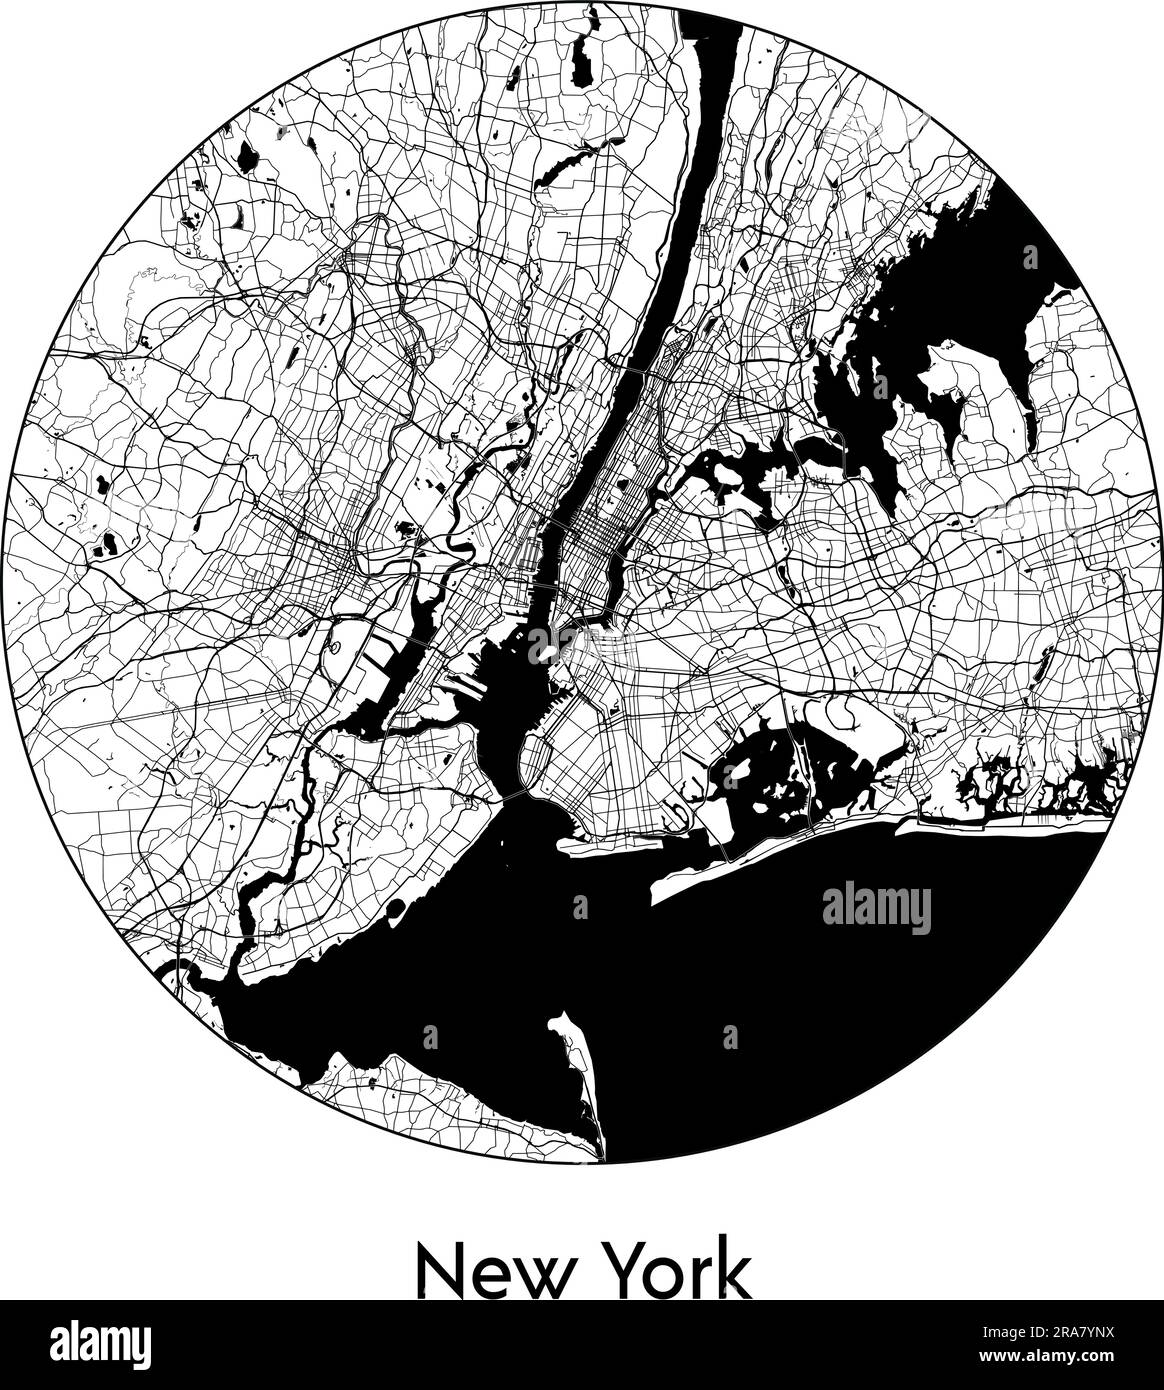 New york map Stock Vector Images - Alamy